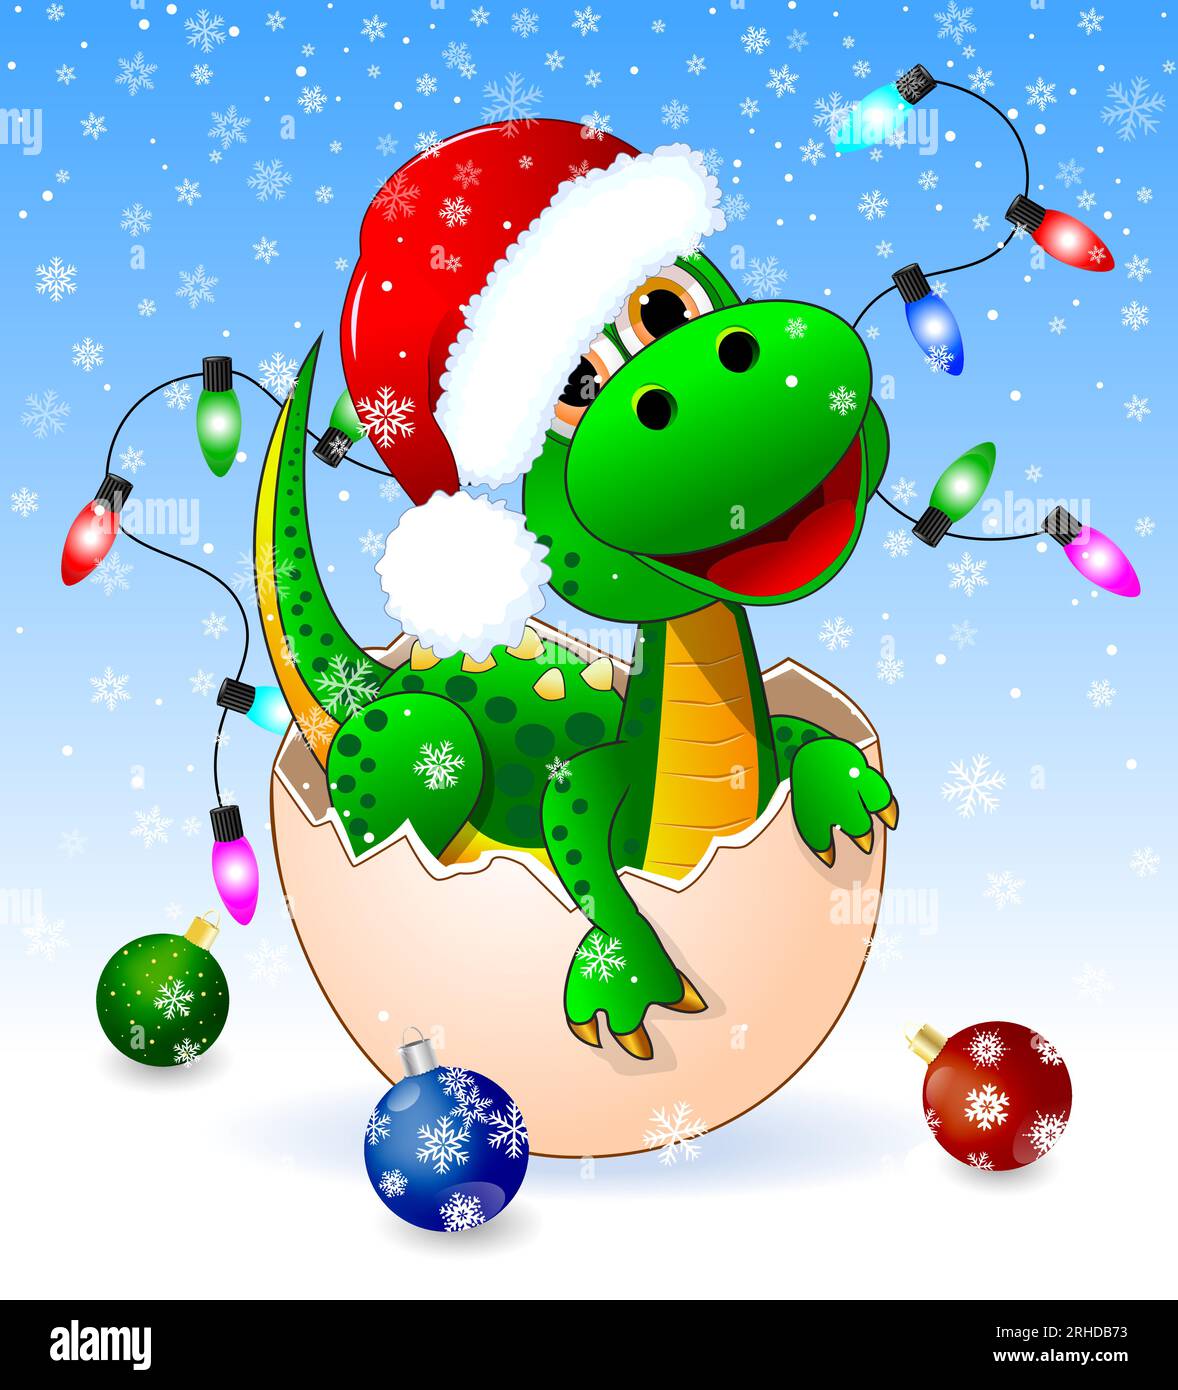 Cute little happy green dinosaur, with Christmas decorations and a Santa Claus hat, in a snowy winter landscape. Stock Vector